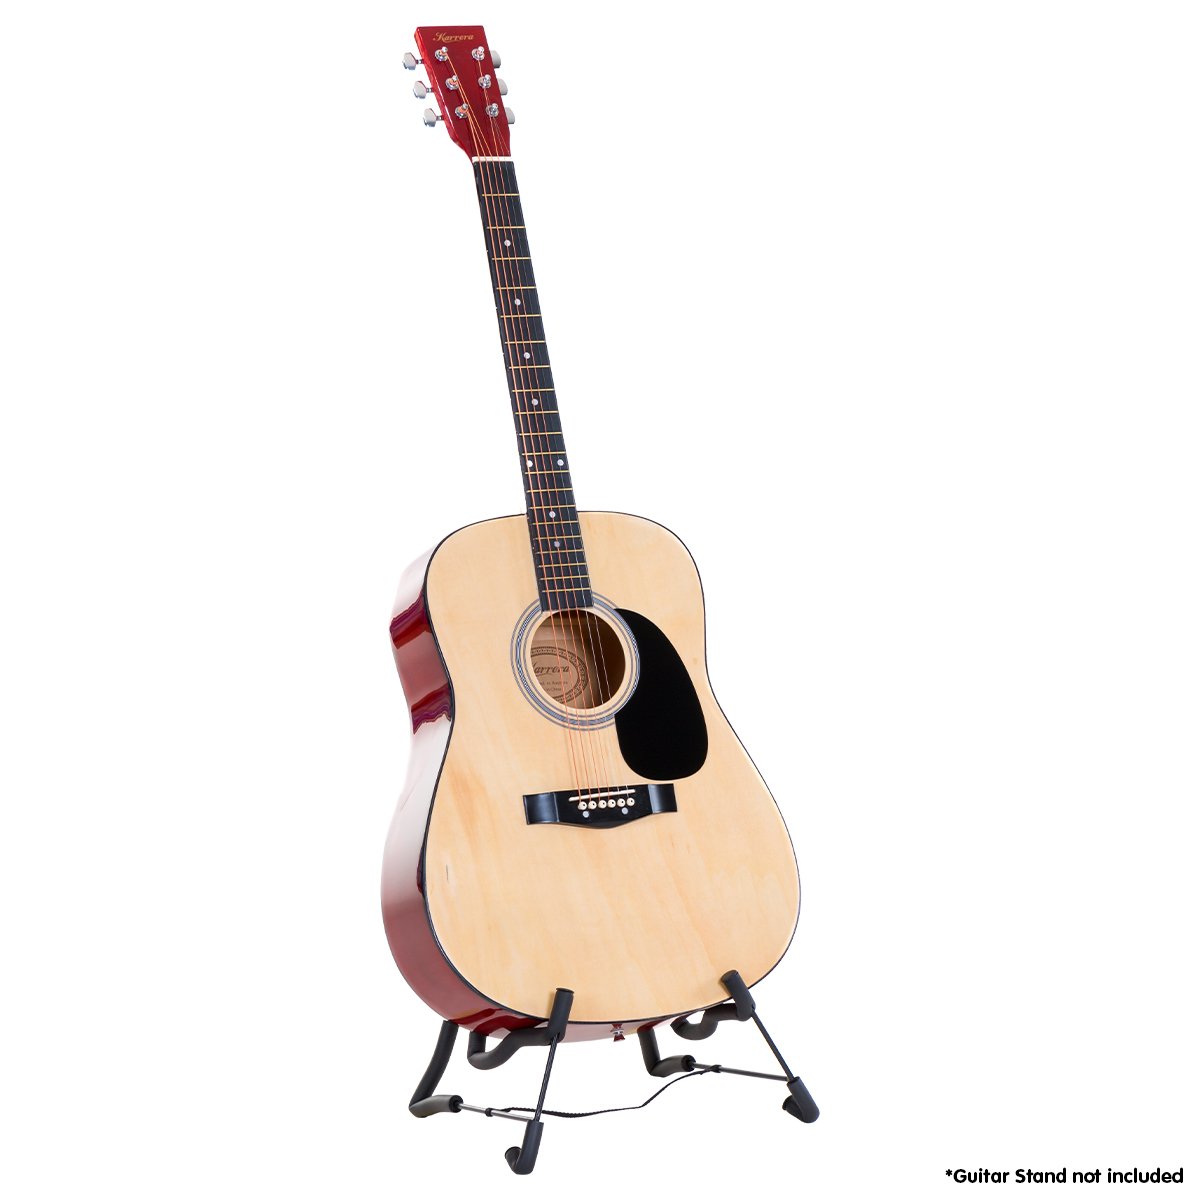 Karrera 41in Acoustic Wooden Guitar with Bag - Natural - SILBERSHELL